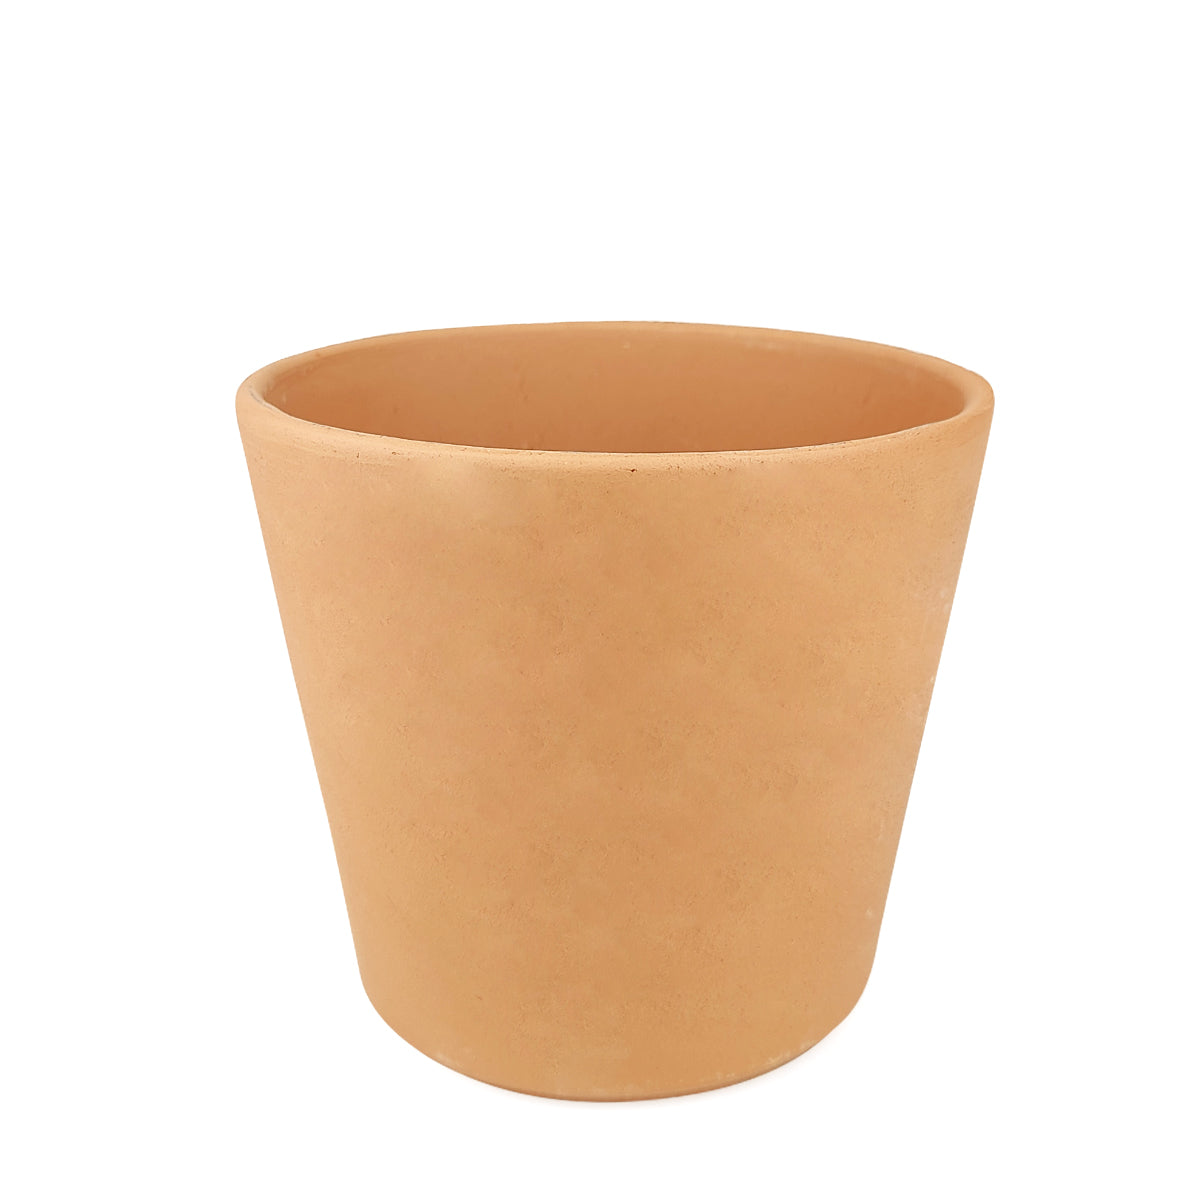 Houseplant terracotta pot with drainage hole for sale, 5 inch traditional terra cotta plant pot for succulent houseplant and flower